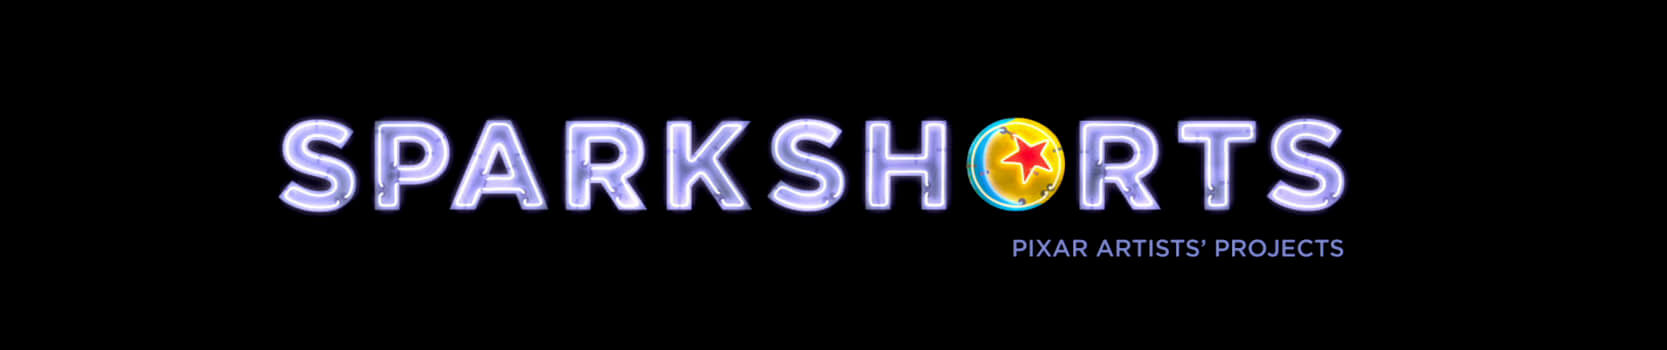 New Batch of Pixar’s SparkShorts to Be Released in September